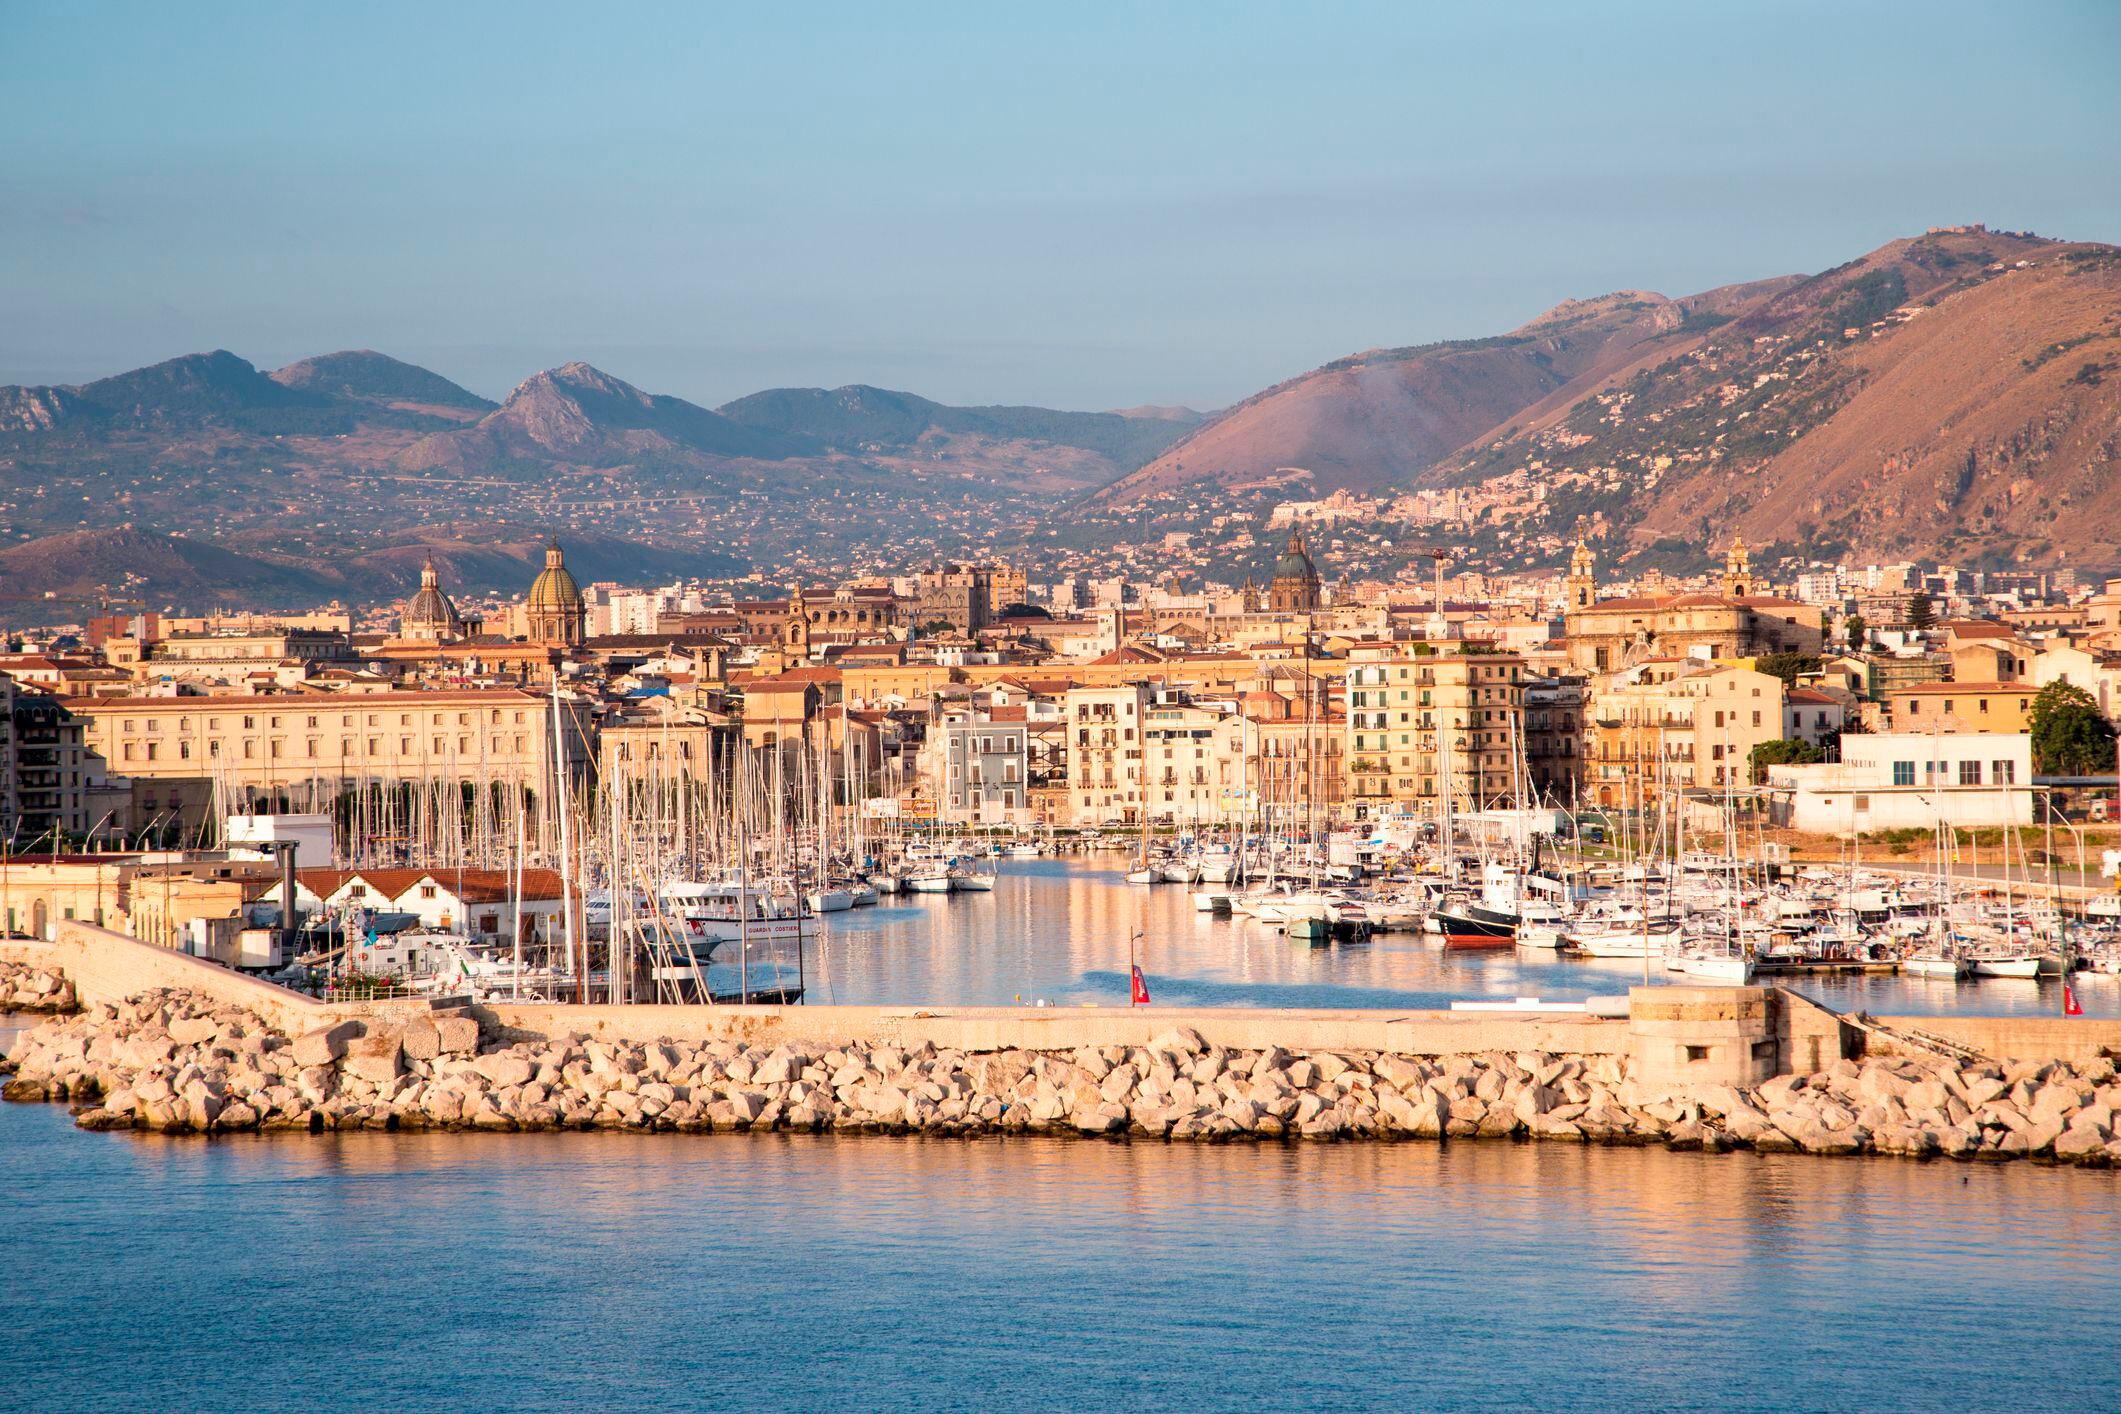 Breakwater, marina, city and mountains seen from sea, Palermo, Sicily, Italy.